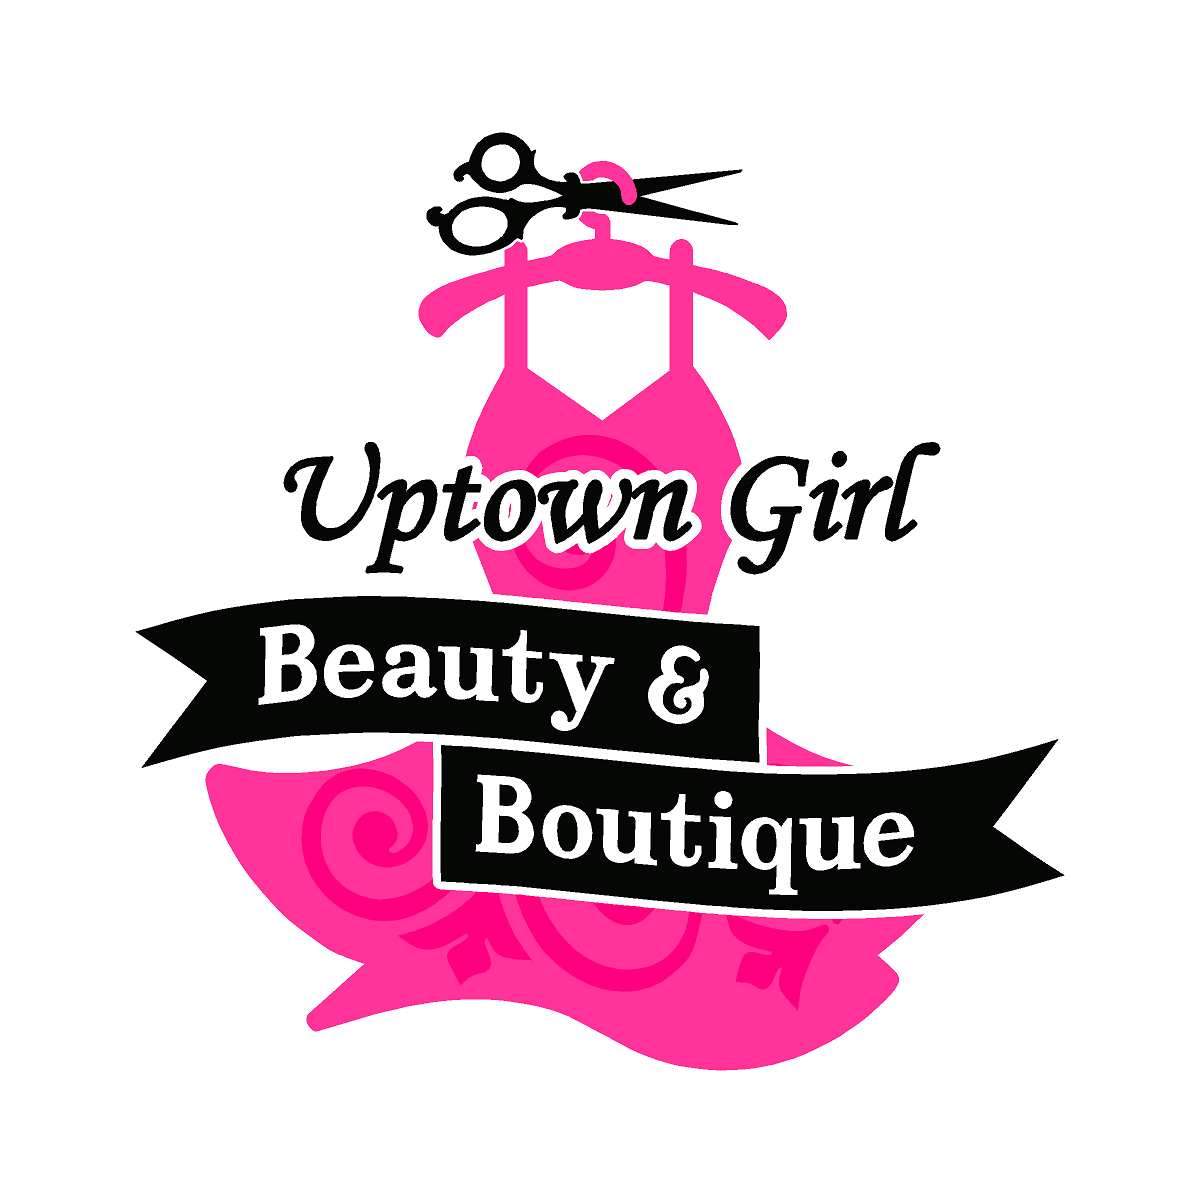 UPTOWN GIRL BEAUTY & BOUTIQUE